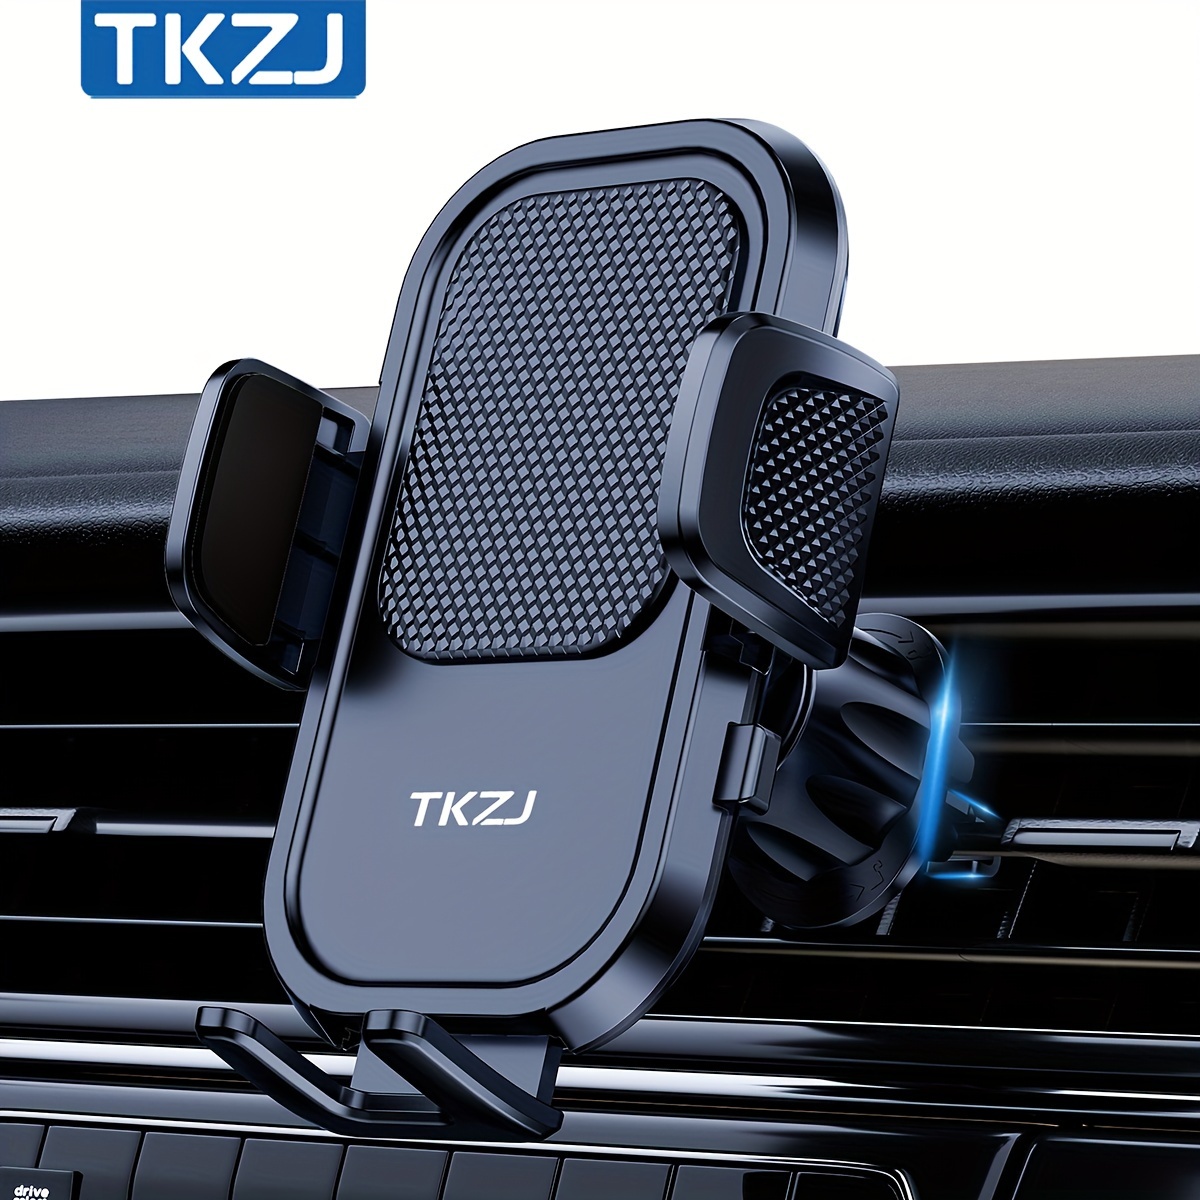 

Tkzj T004l Magnetic Car Phone Holder, Upgraded Super Strong Magnetic Cell Phone Mount For Car Air Vent, Compatible With All Smartphones, Fit For Iphone 14 13 12 Pro Max All Phones